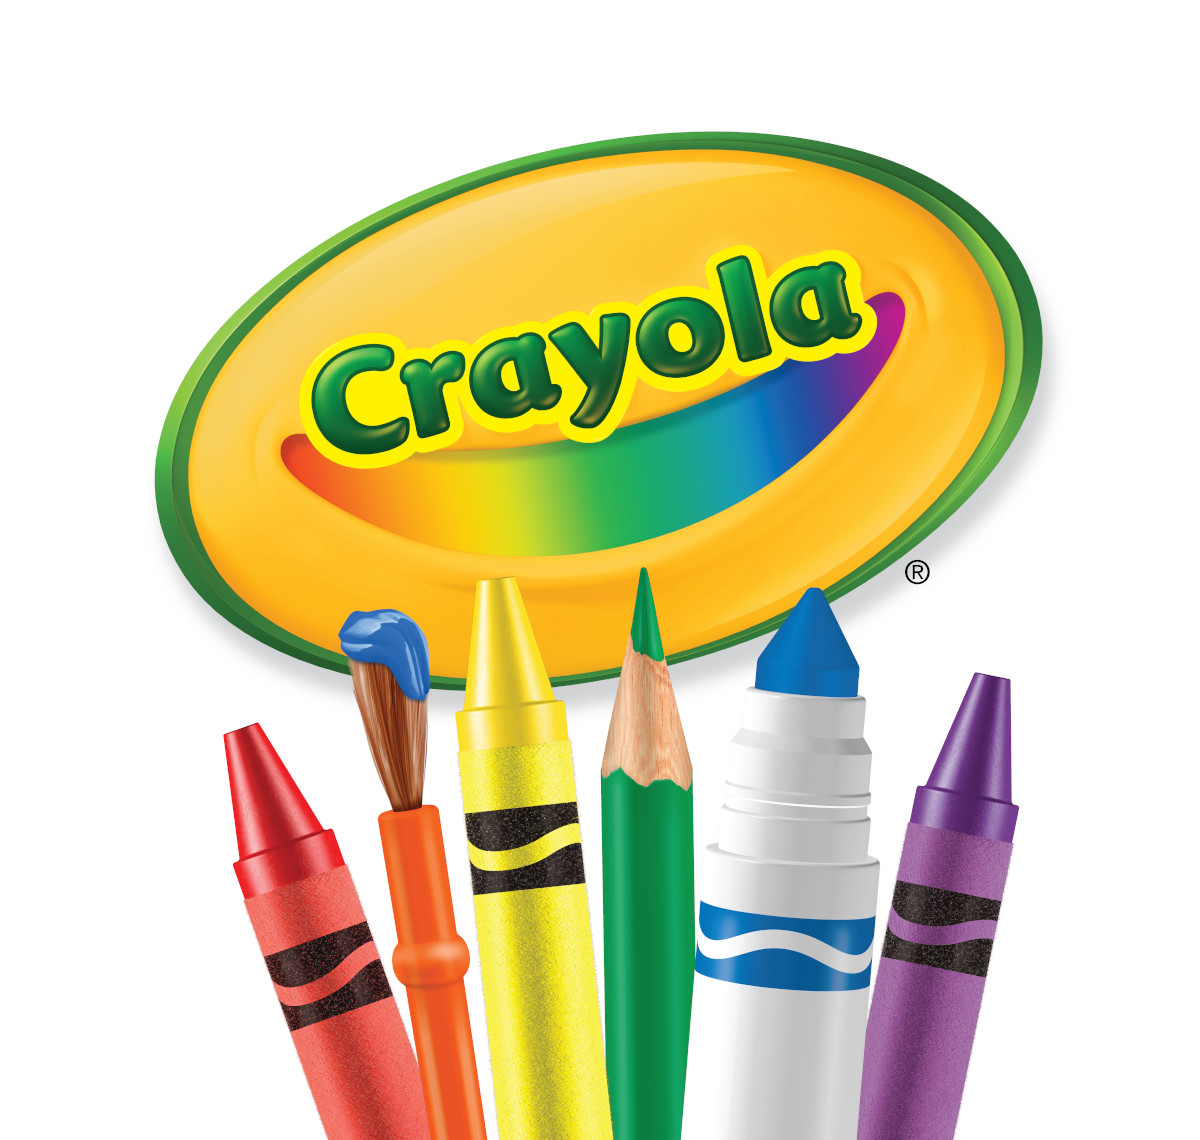 Crayola Construction Colored Paper in 10 Colors, School Supplies for Kindergarten, 120 Pcs, Child - image 6 of 11